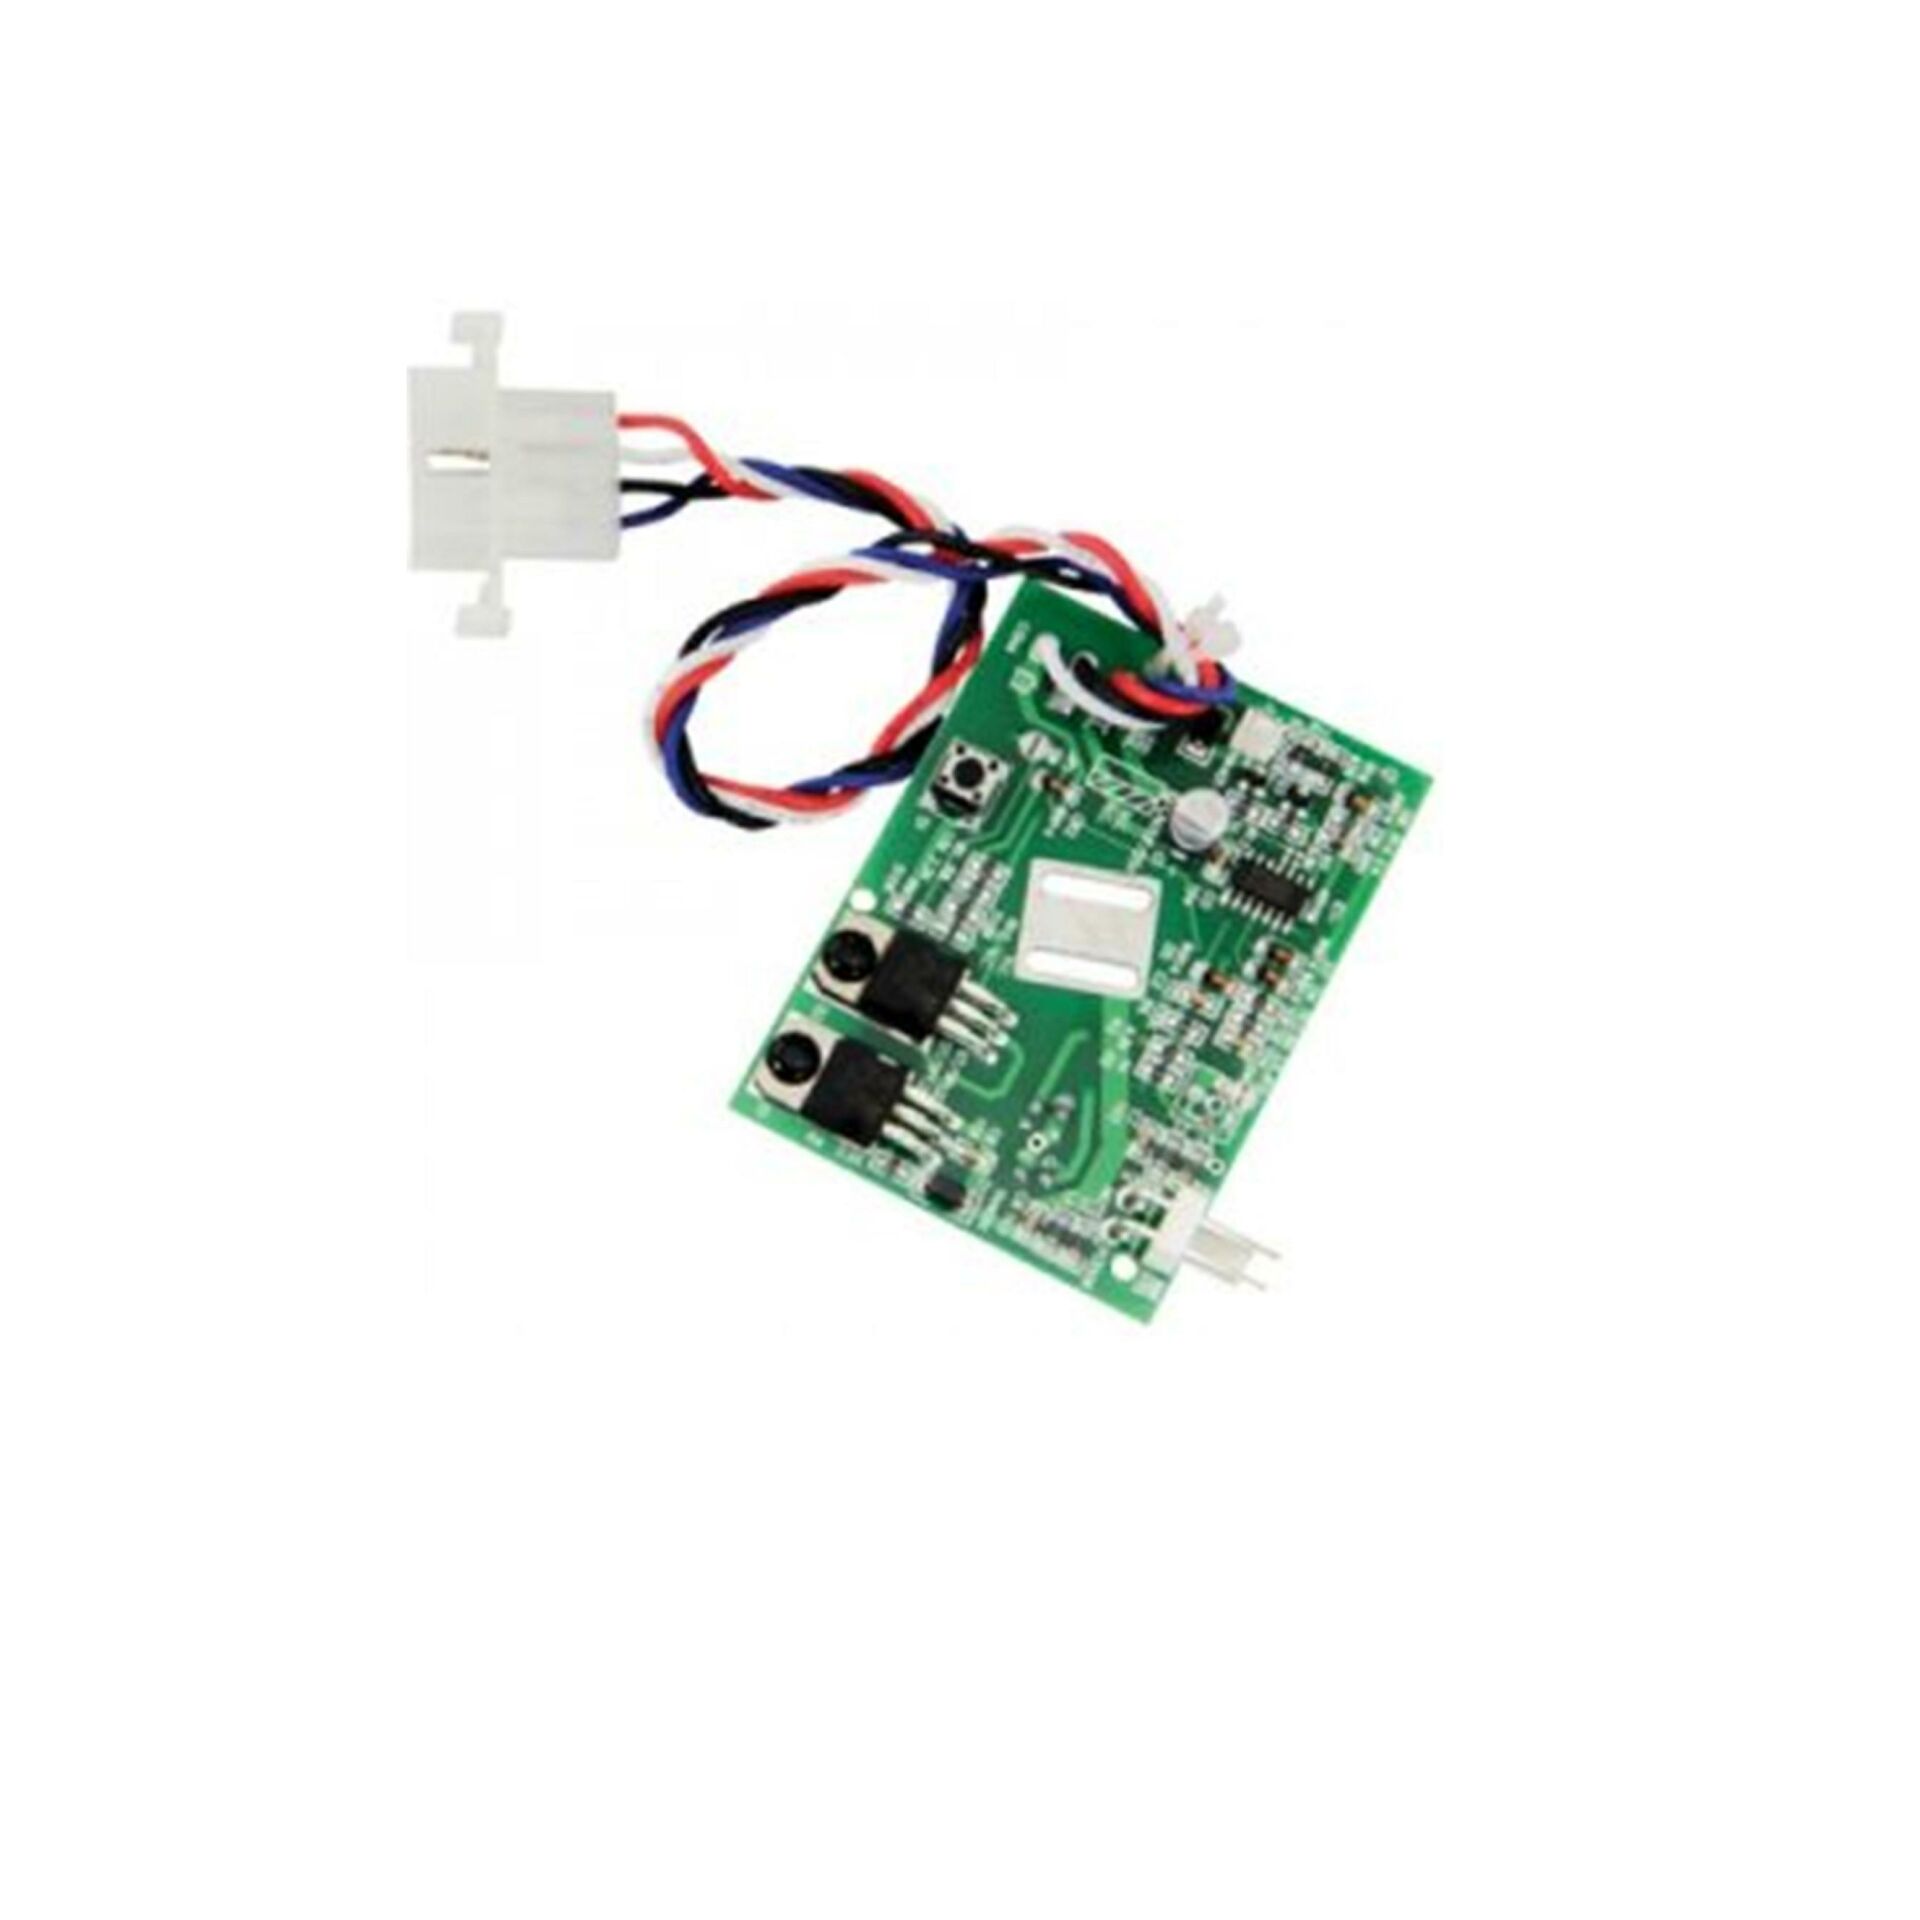 CL-002Q-270 Ticket Dispencer, Mainboard_